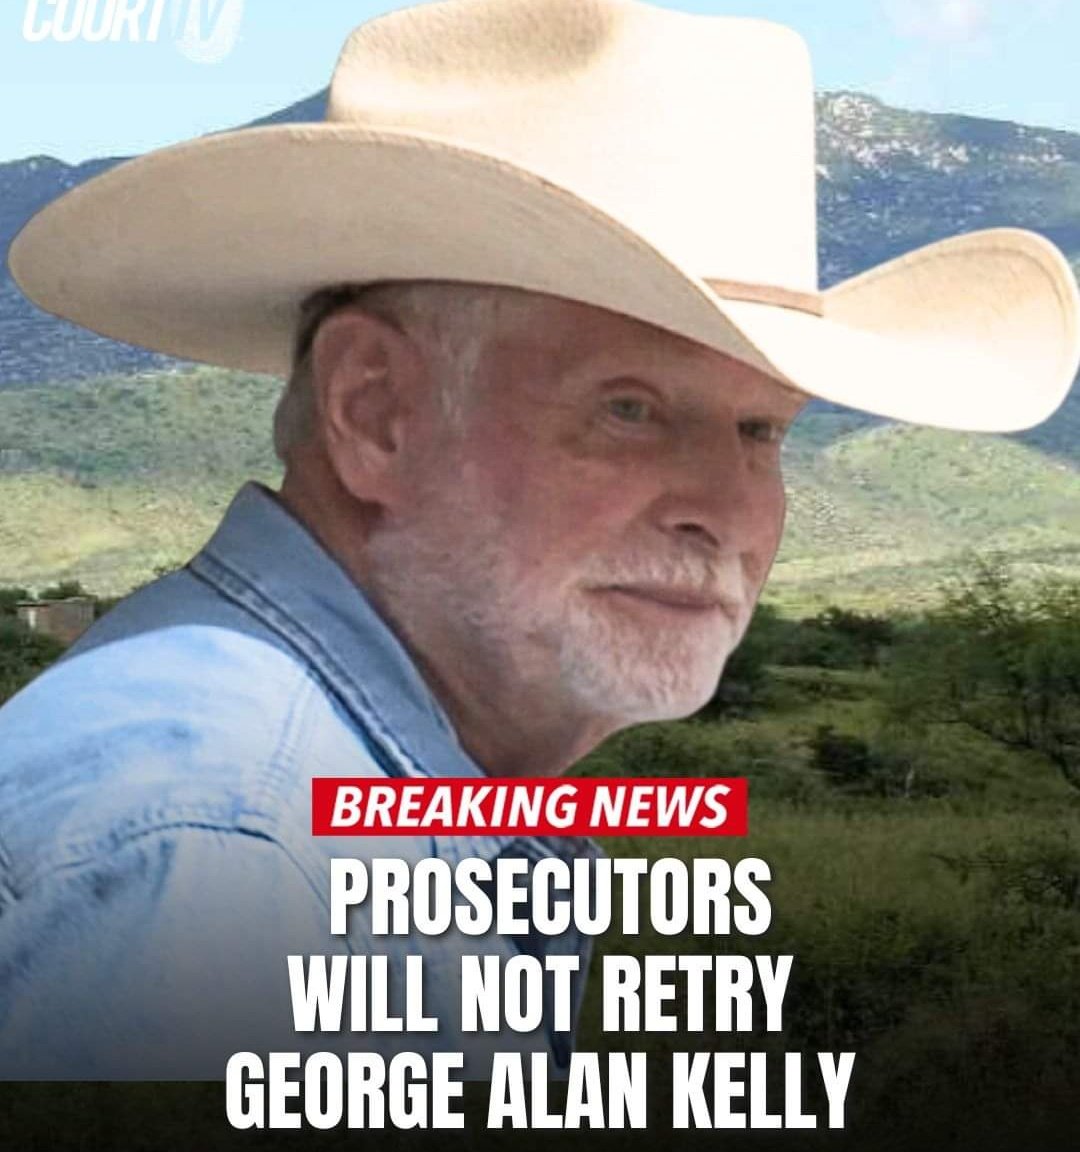 The Arizona rancher George Alan Kelly will not face a retrial after the judge declared a mistrial. 
#Arizona #GeorgeAlanKelly